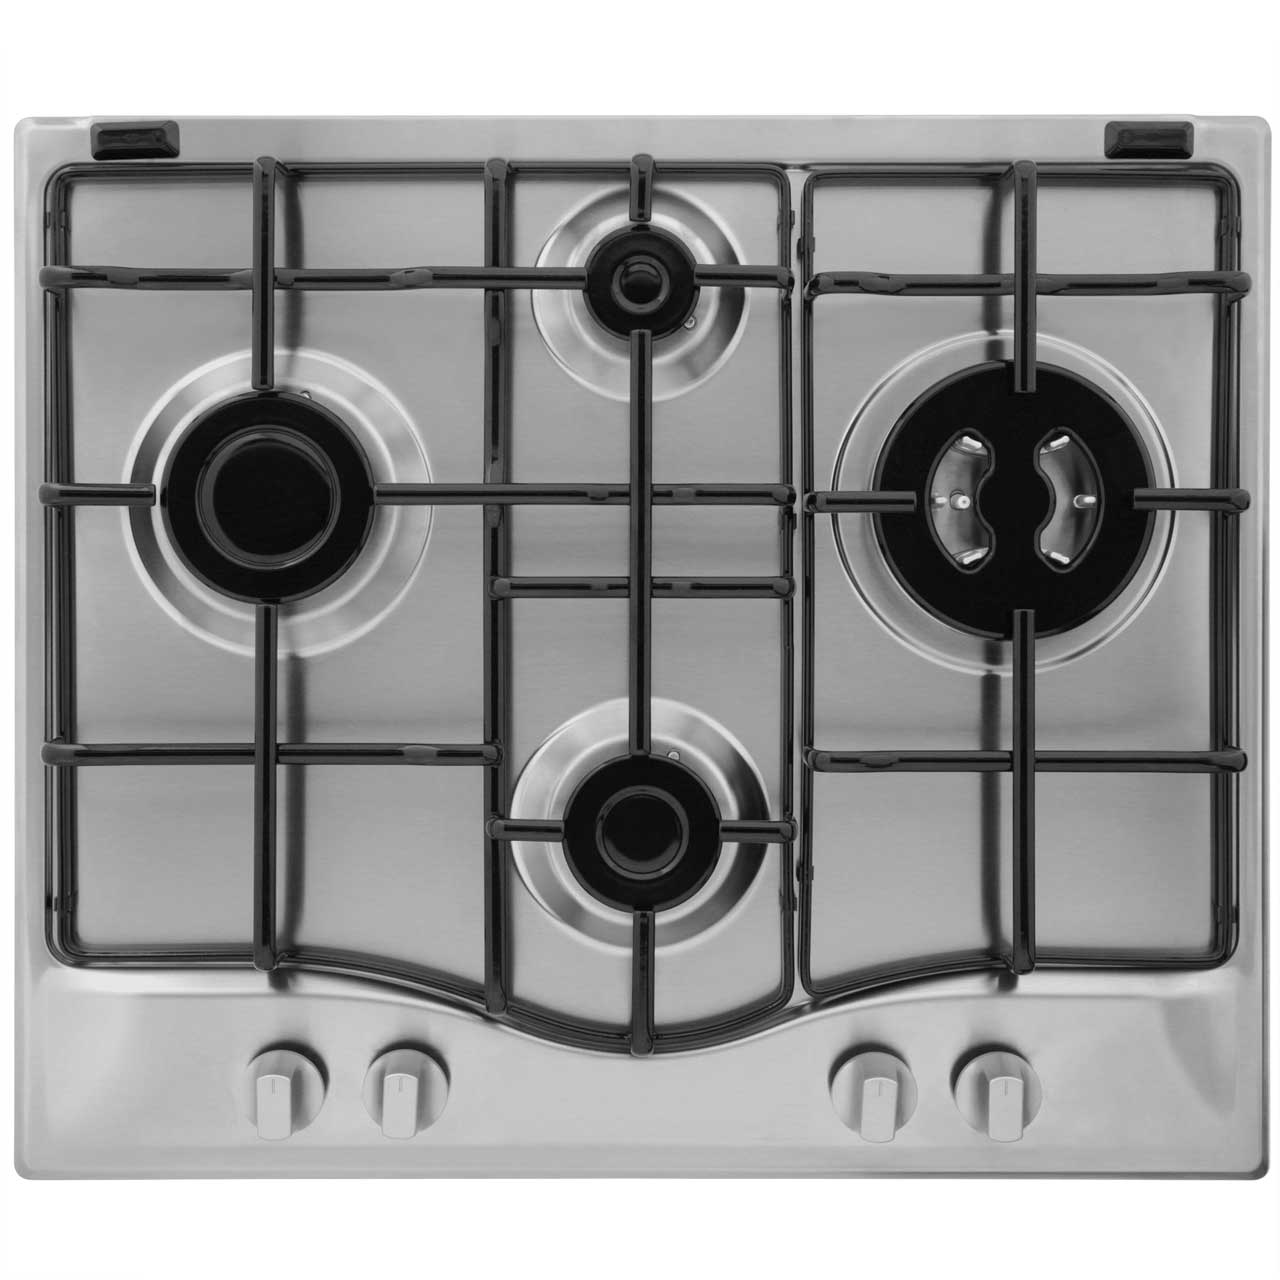 Hotpoint GC640TX Integrated Gas Hob in Stainless Steel